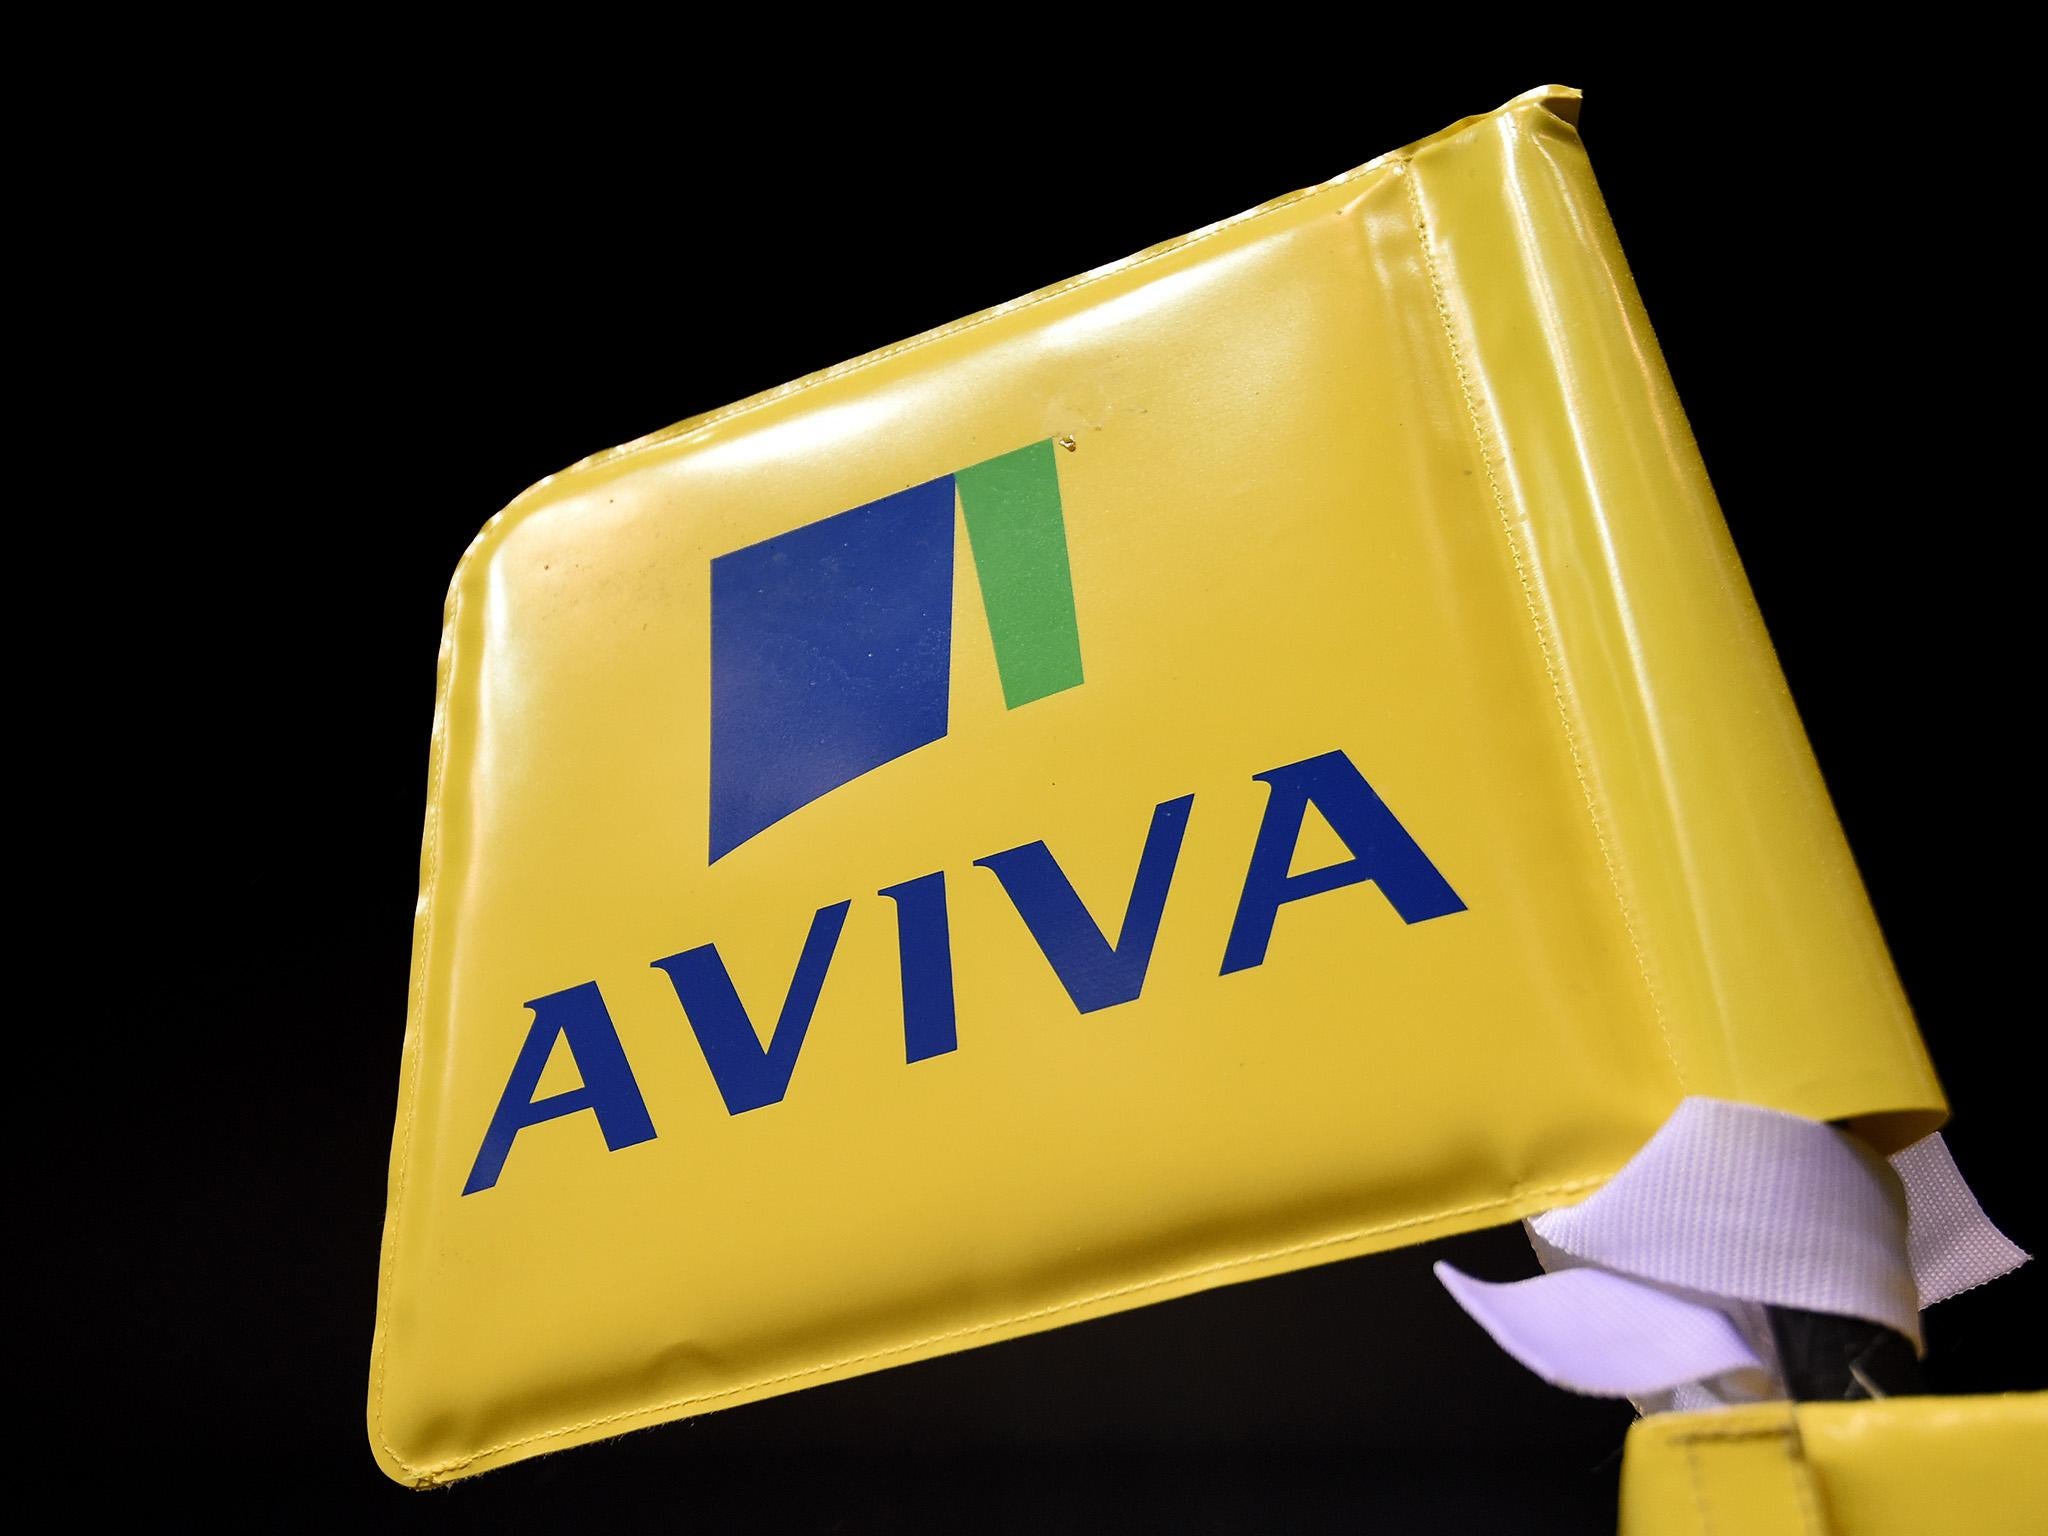 Aviva posts 'steady' first half of 2019 and mulls sale of Asian business